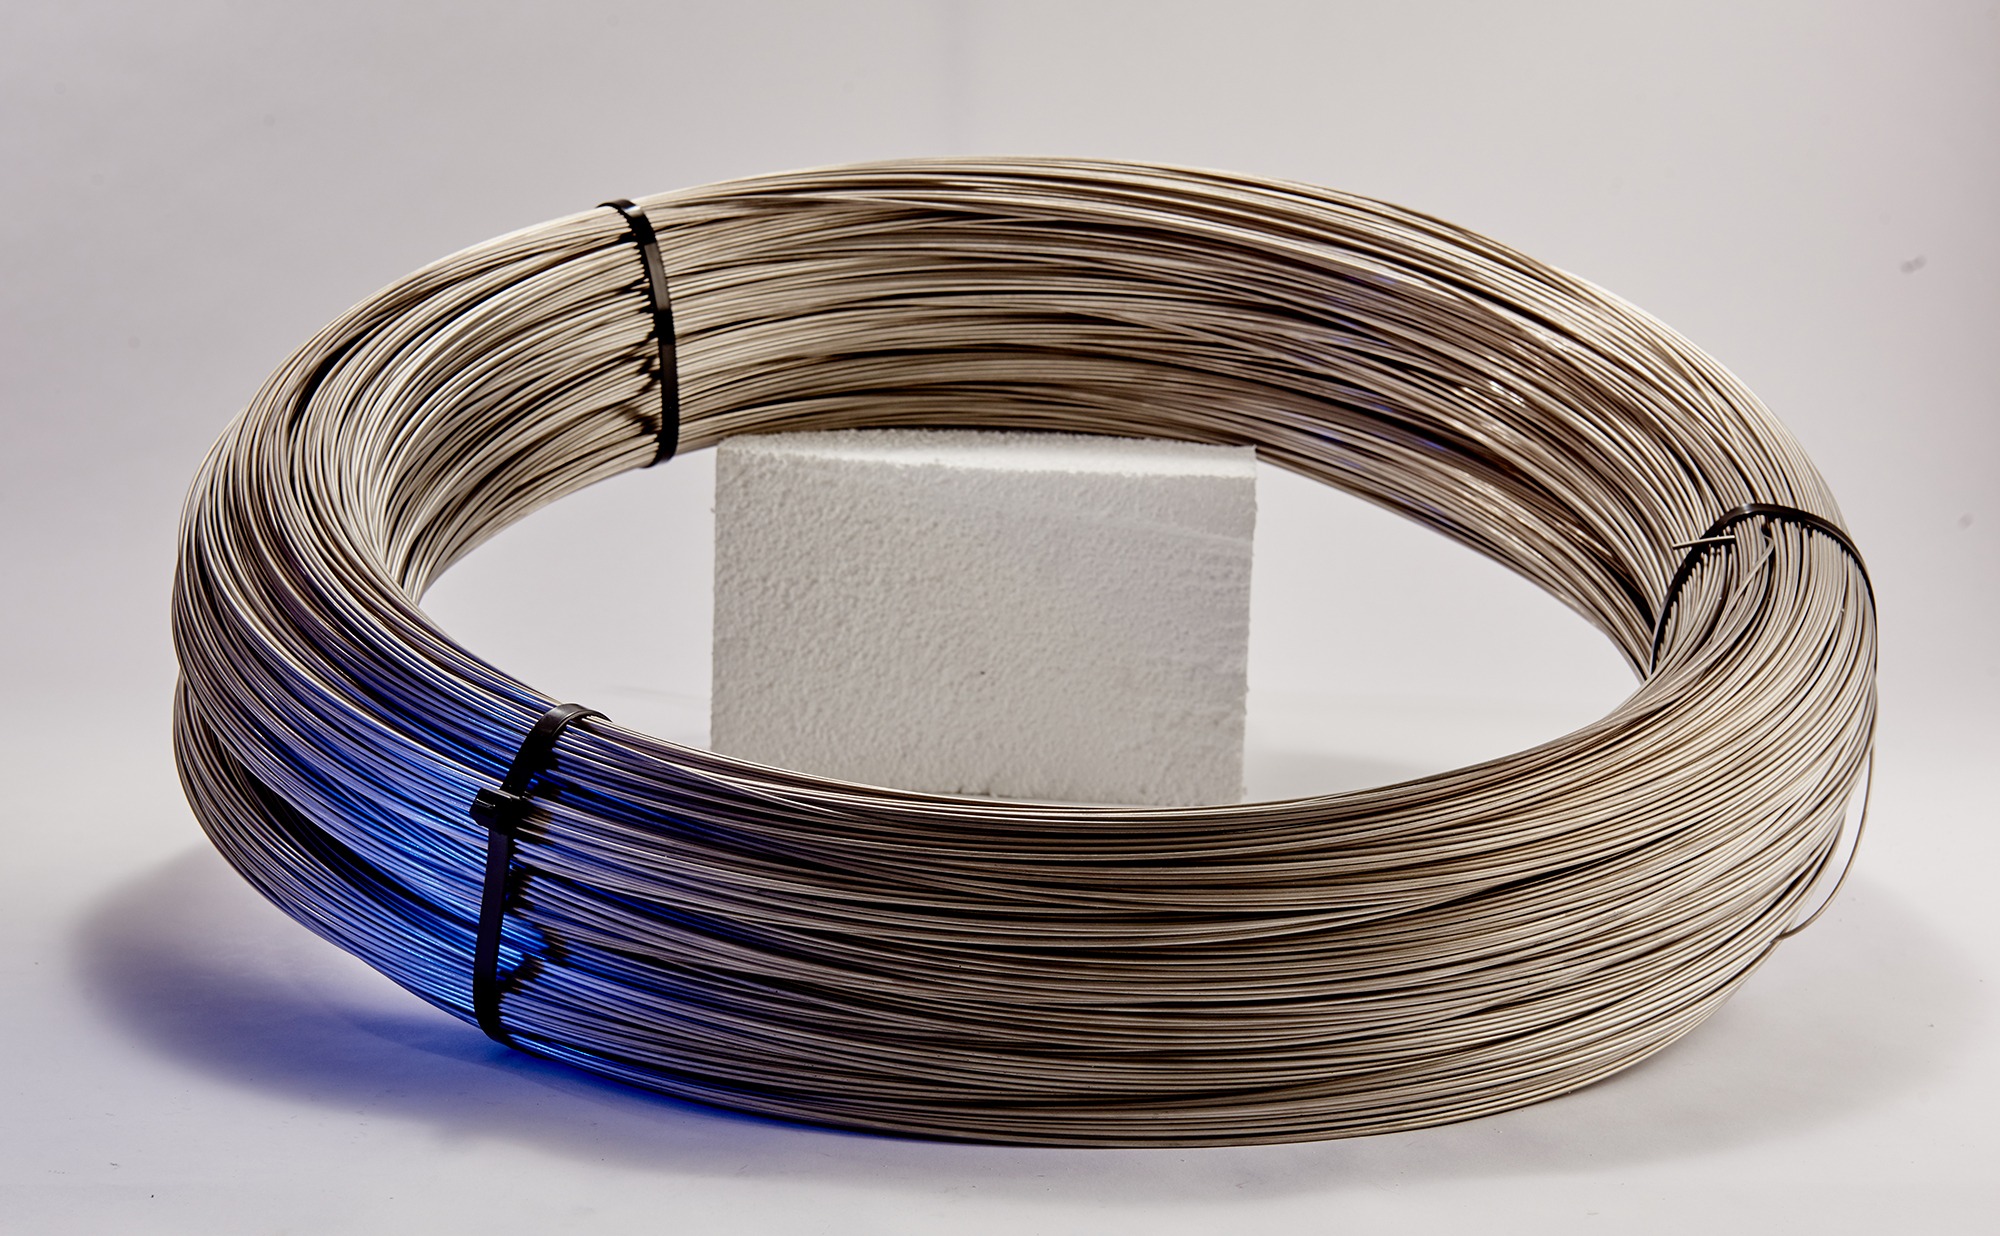 Phynox manufactured by Alloy Wire International